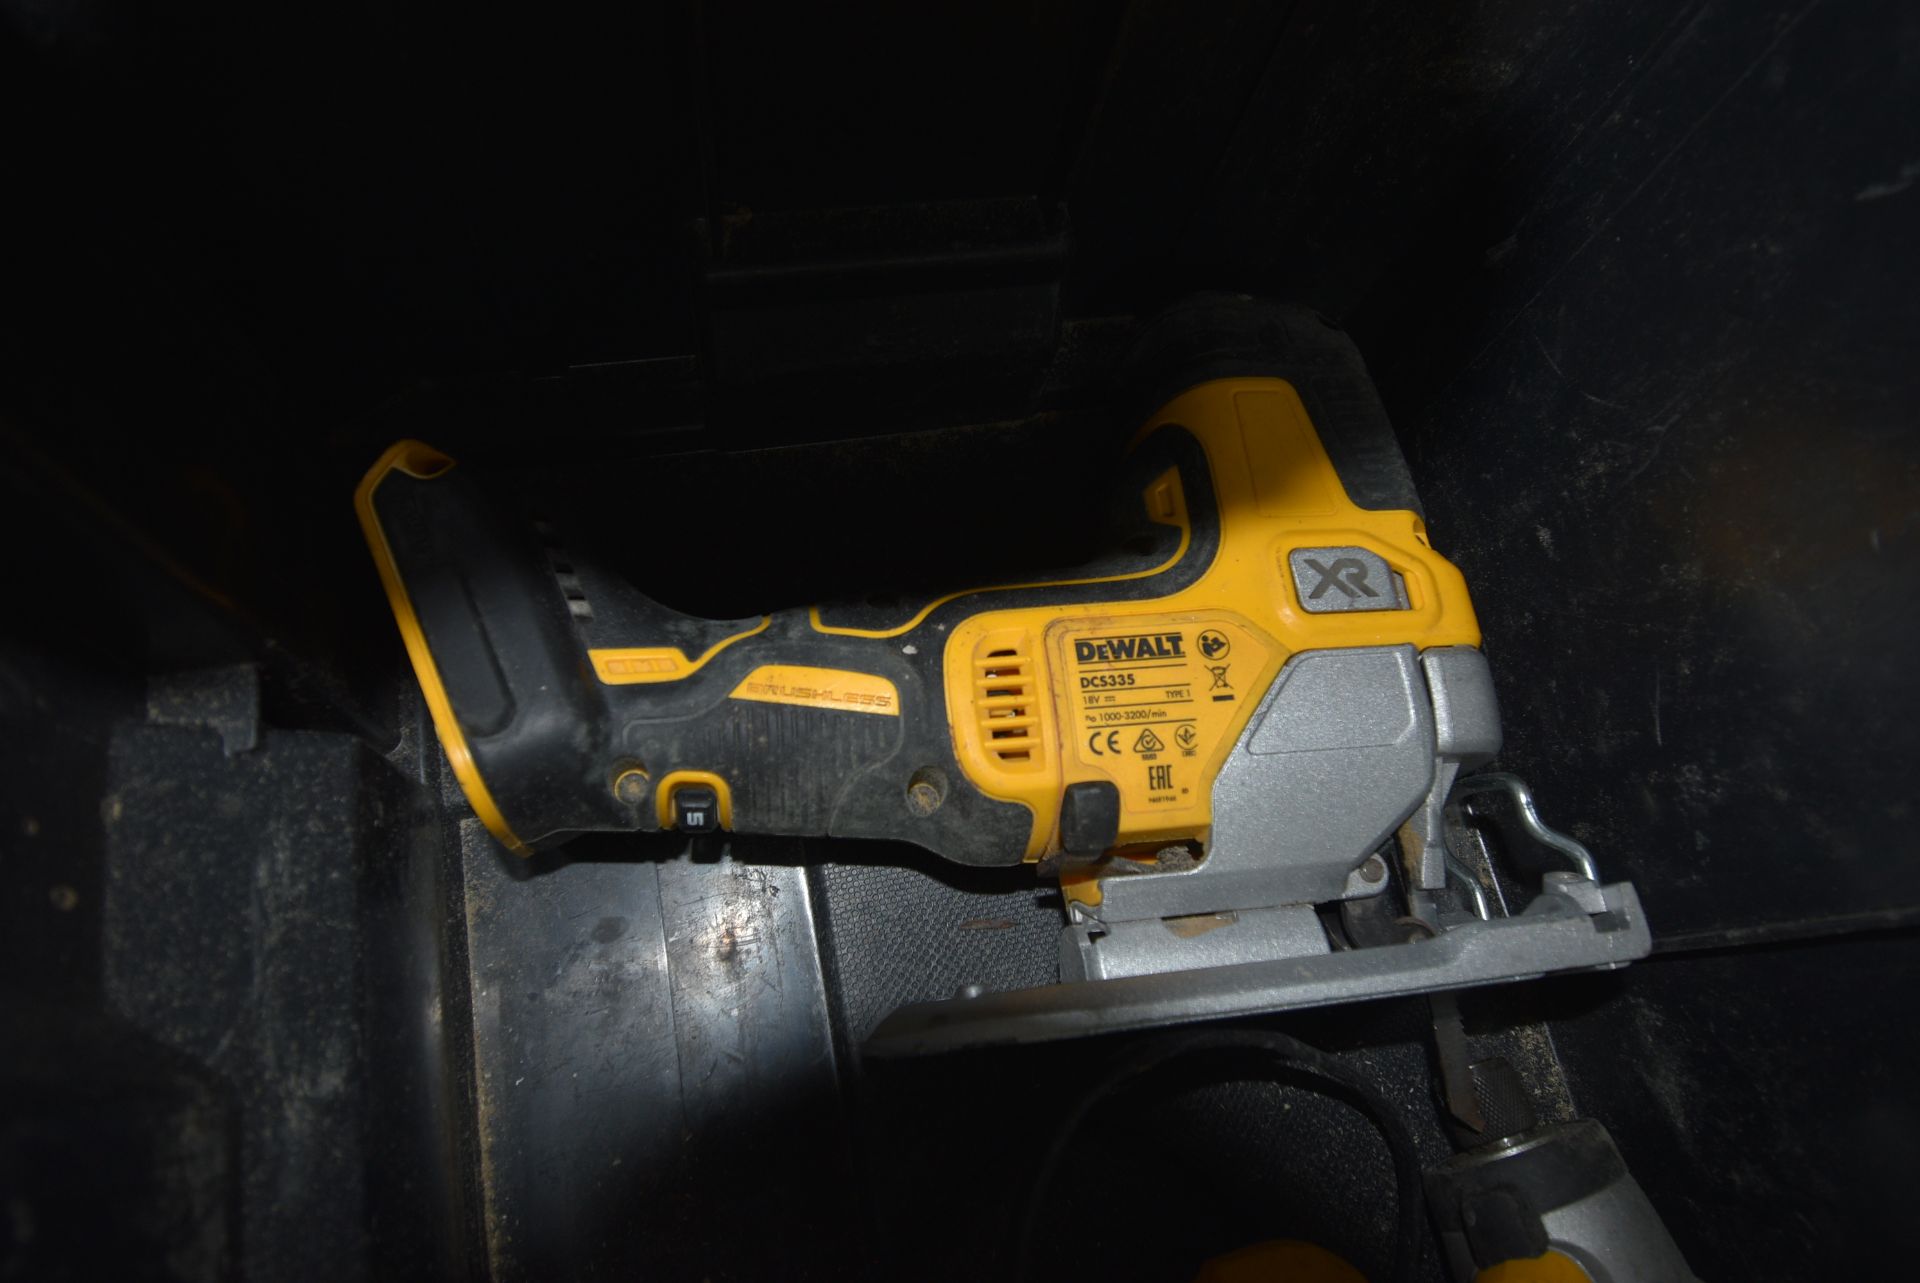 Four Dewalt Battery Operated Tools: Jig Saw, Palm Sander, Driver, and Planer (no batteries) with - Image 4 of 5